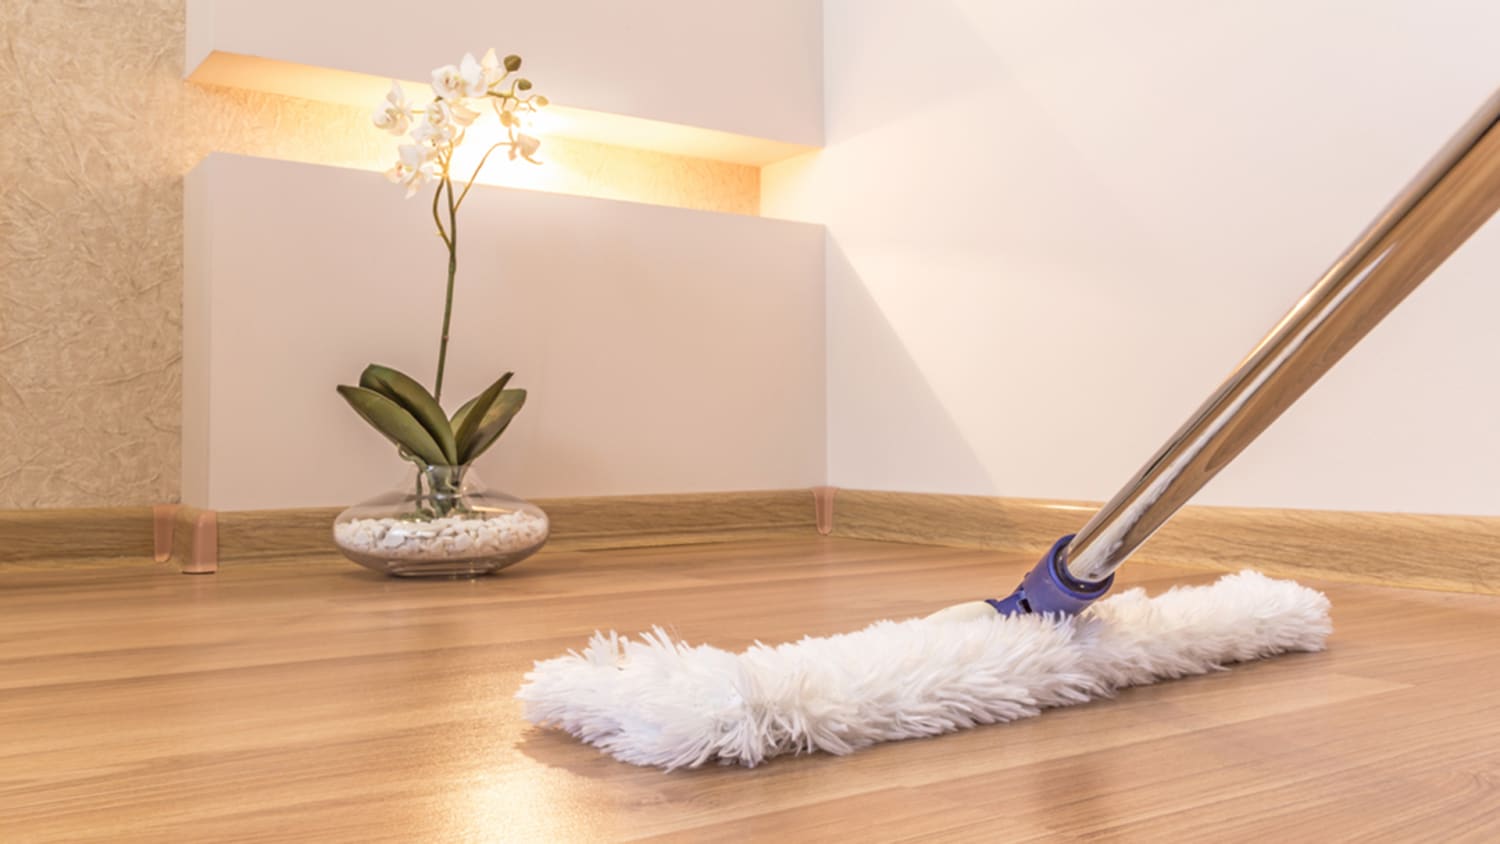 How To Clean Hardwood Floors The Right Way, What Is The Best Floor Cleaner For Hardwood Floors